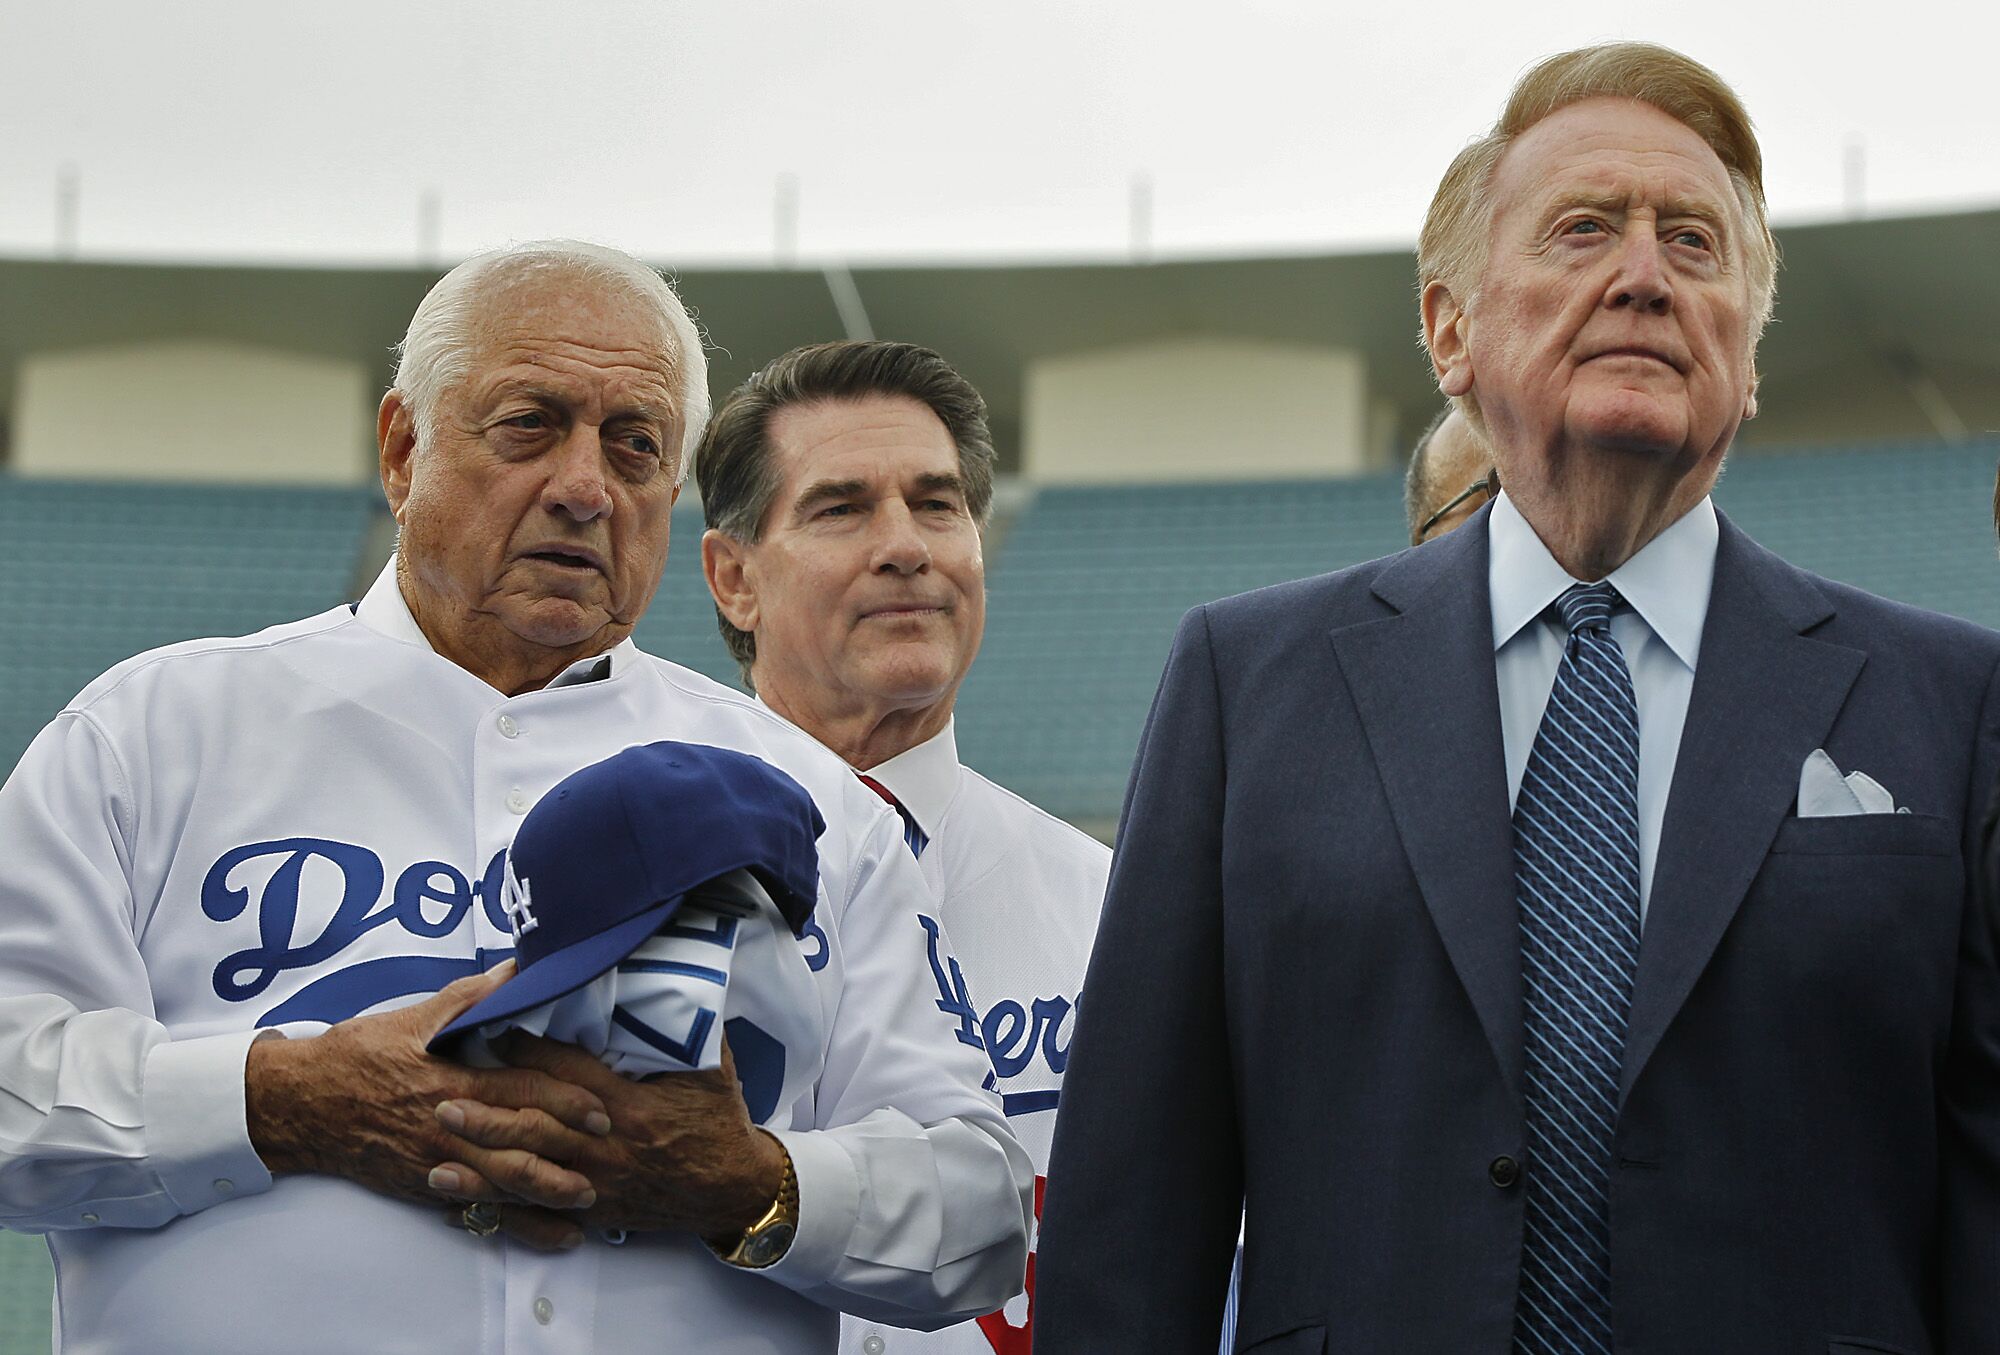 Dodgers greats (from left) Tommy Lasorda, Steve Garvey and Vin Scully attend a news conference.